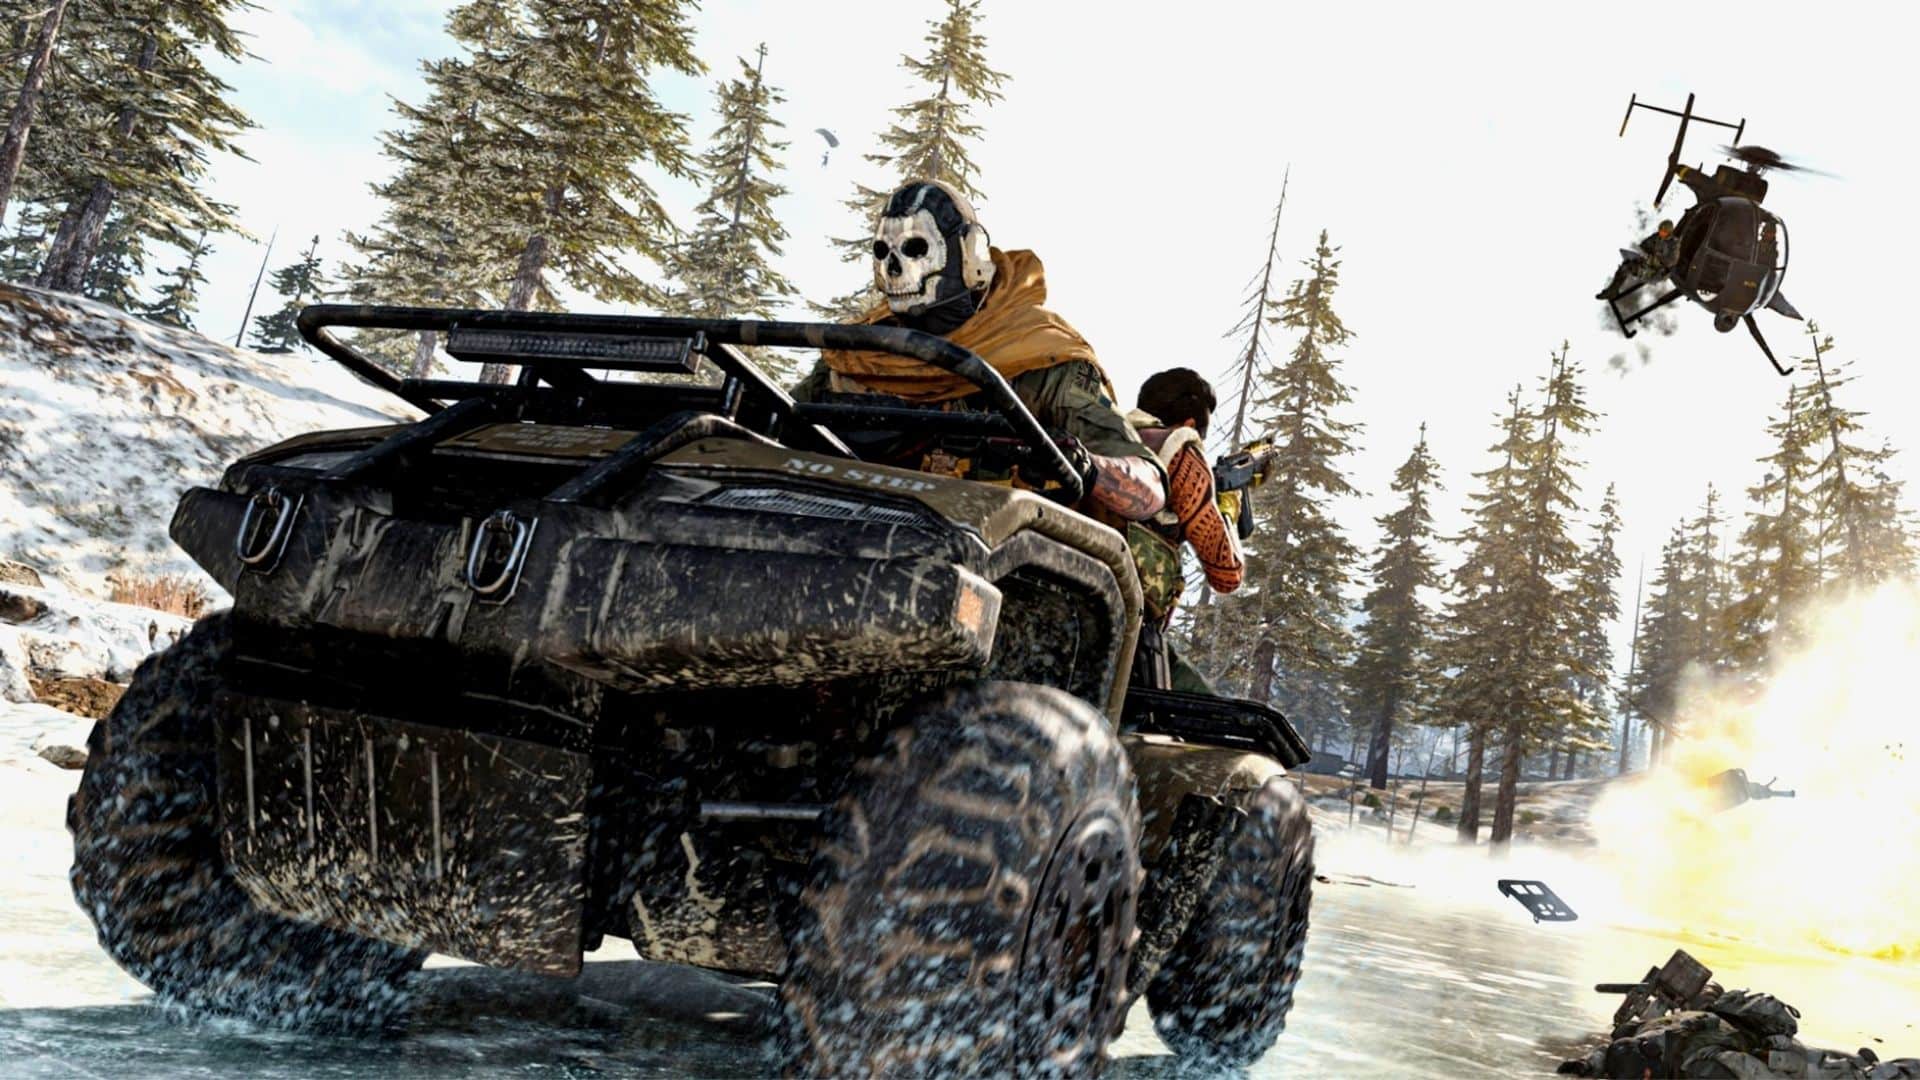 Warzone characters driving an ATV across ice